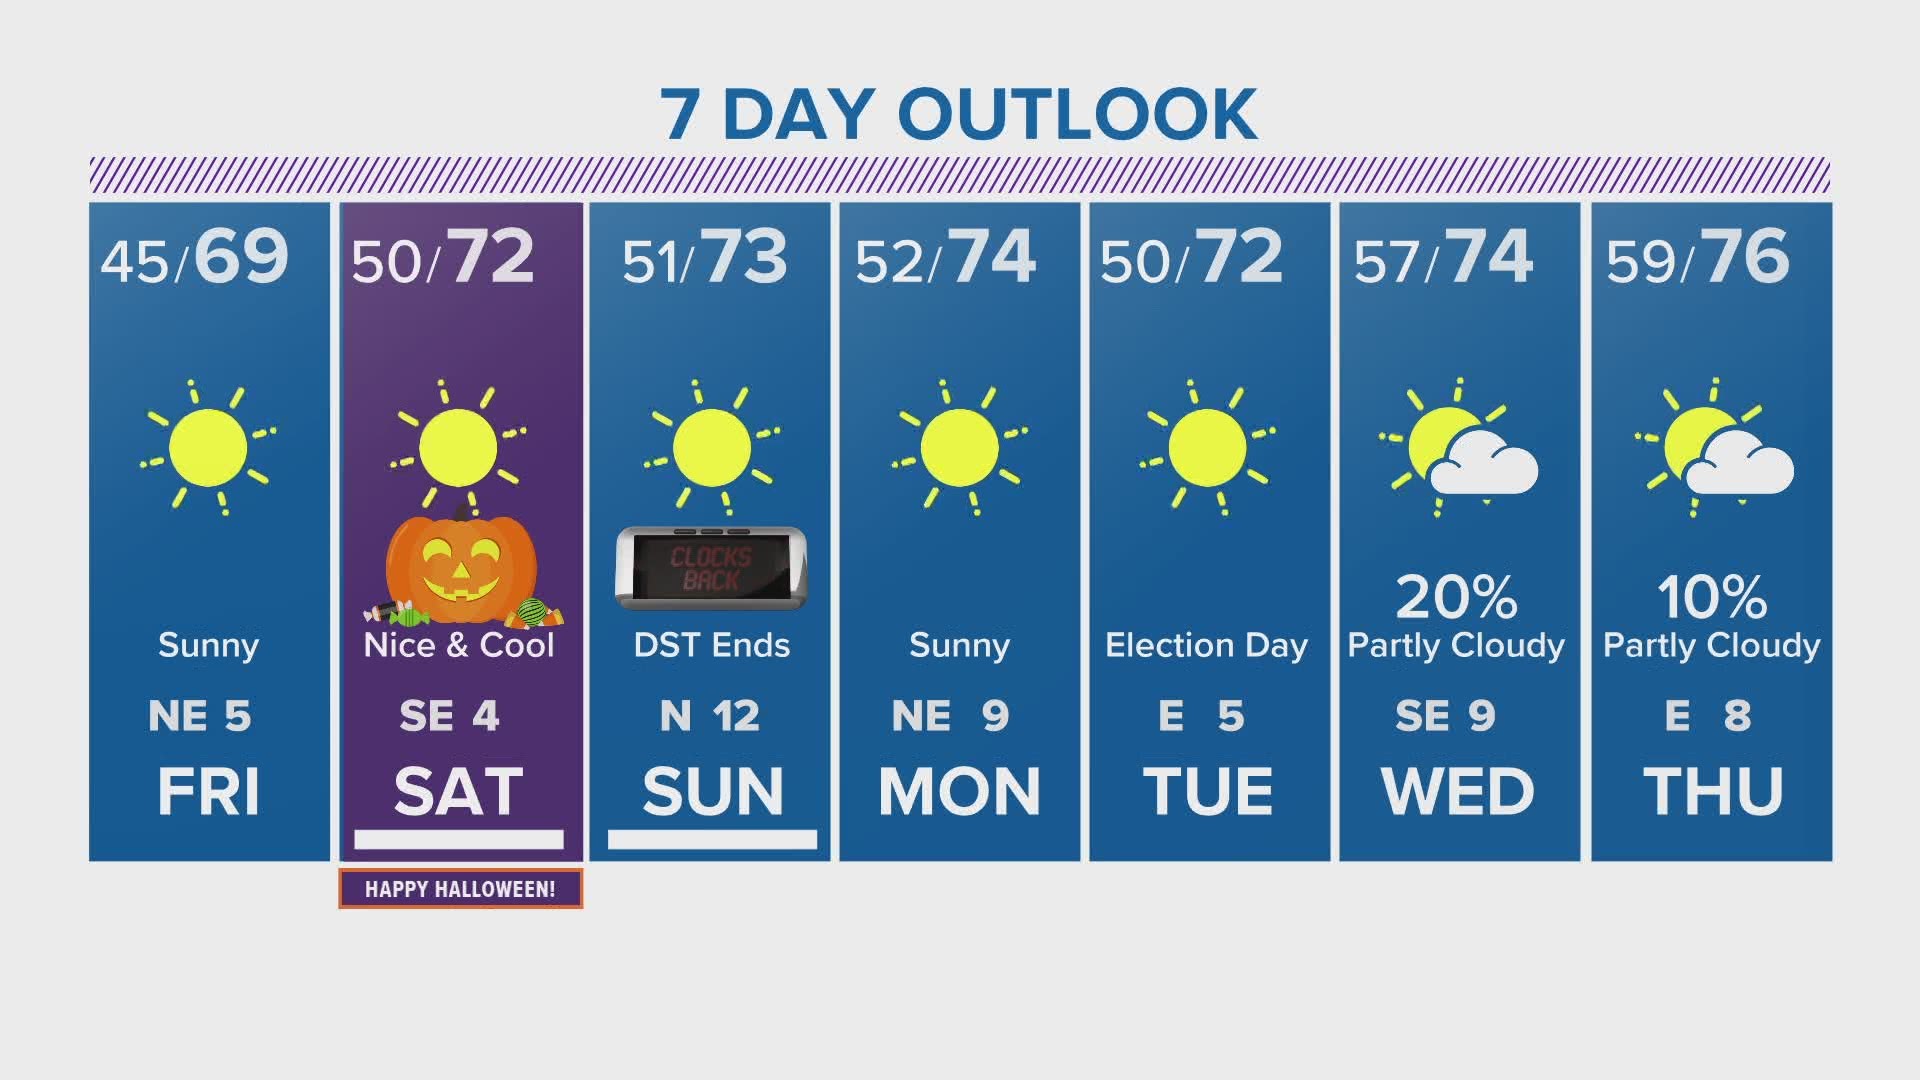 We are in for some fall-like temps and sunny days through the weekend, according to KHOU 11 Chief Meteorologist David Paul.